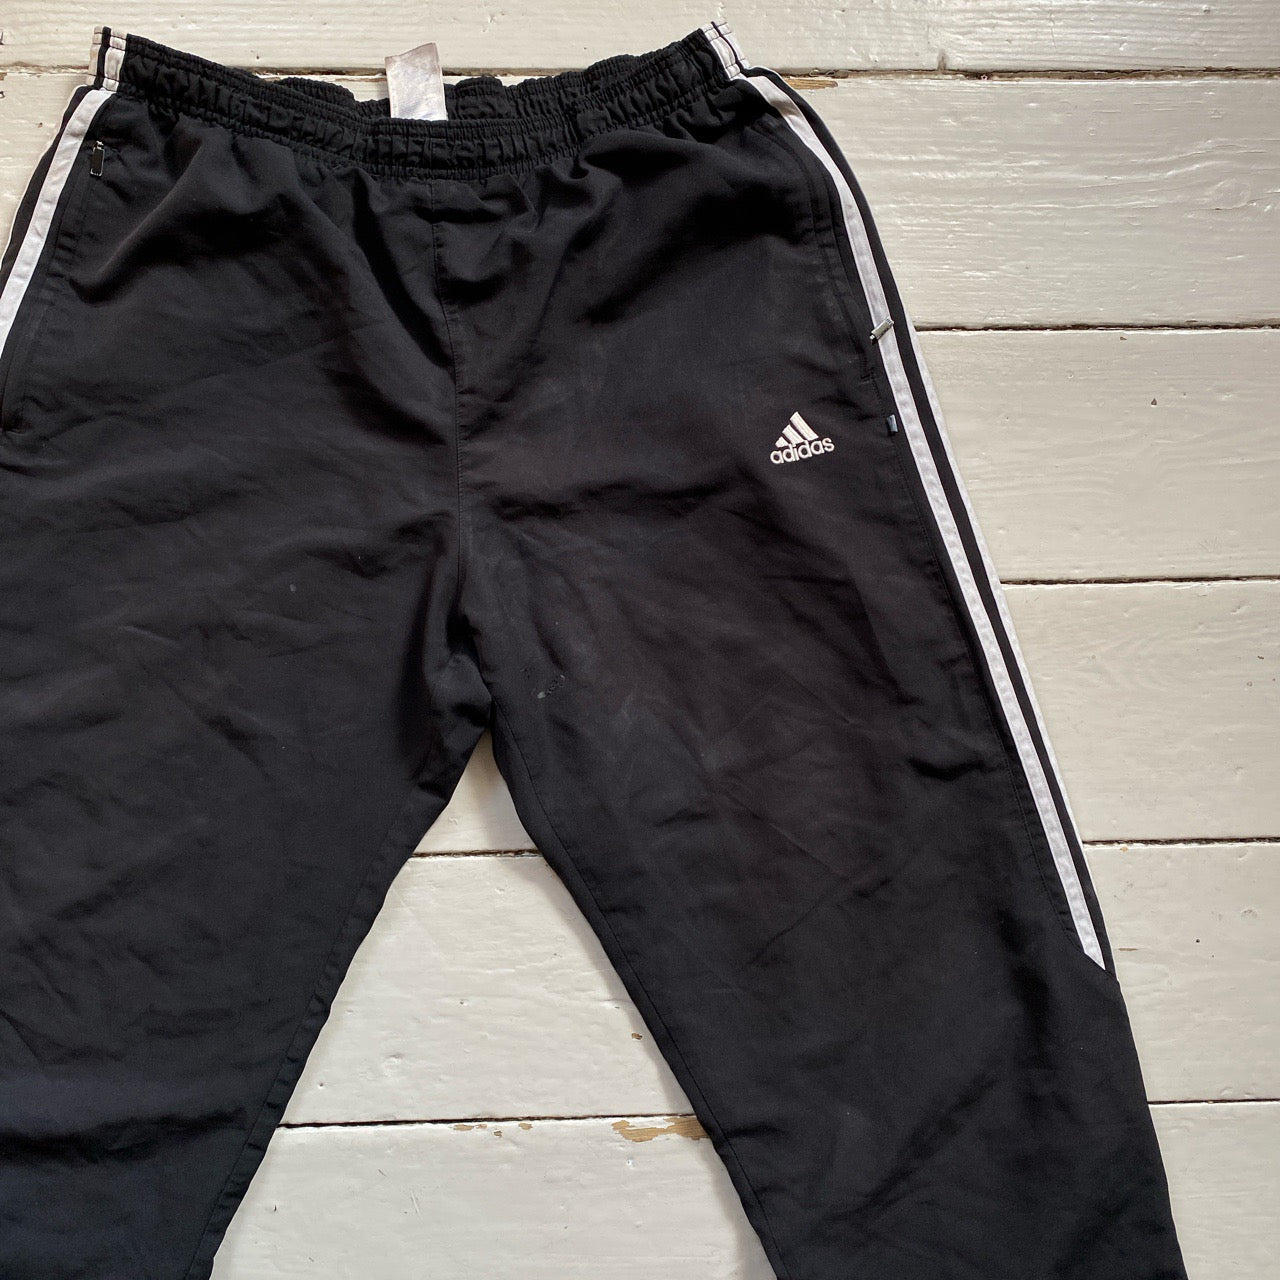 Adidas Black and White Shell Bottoms (W34)